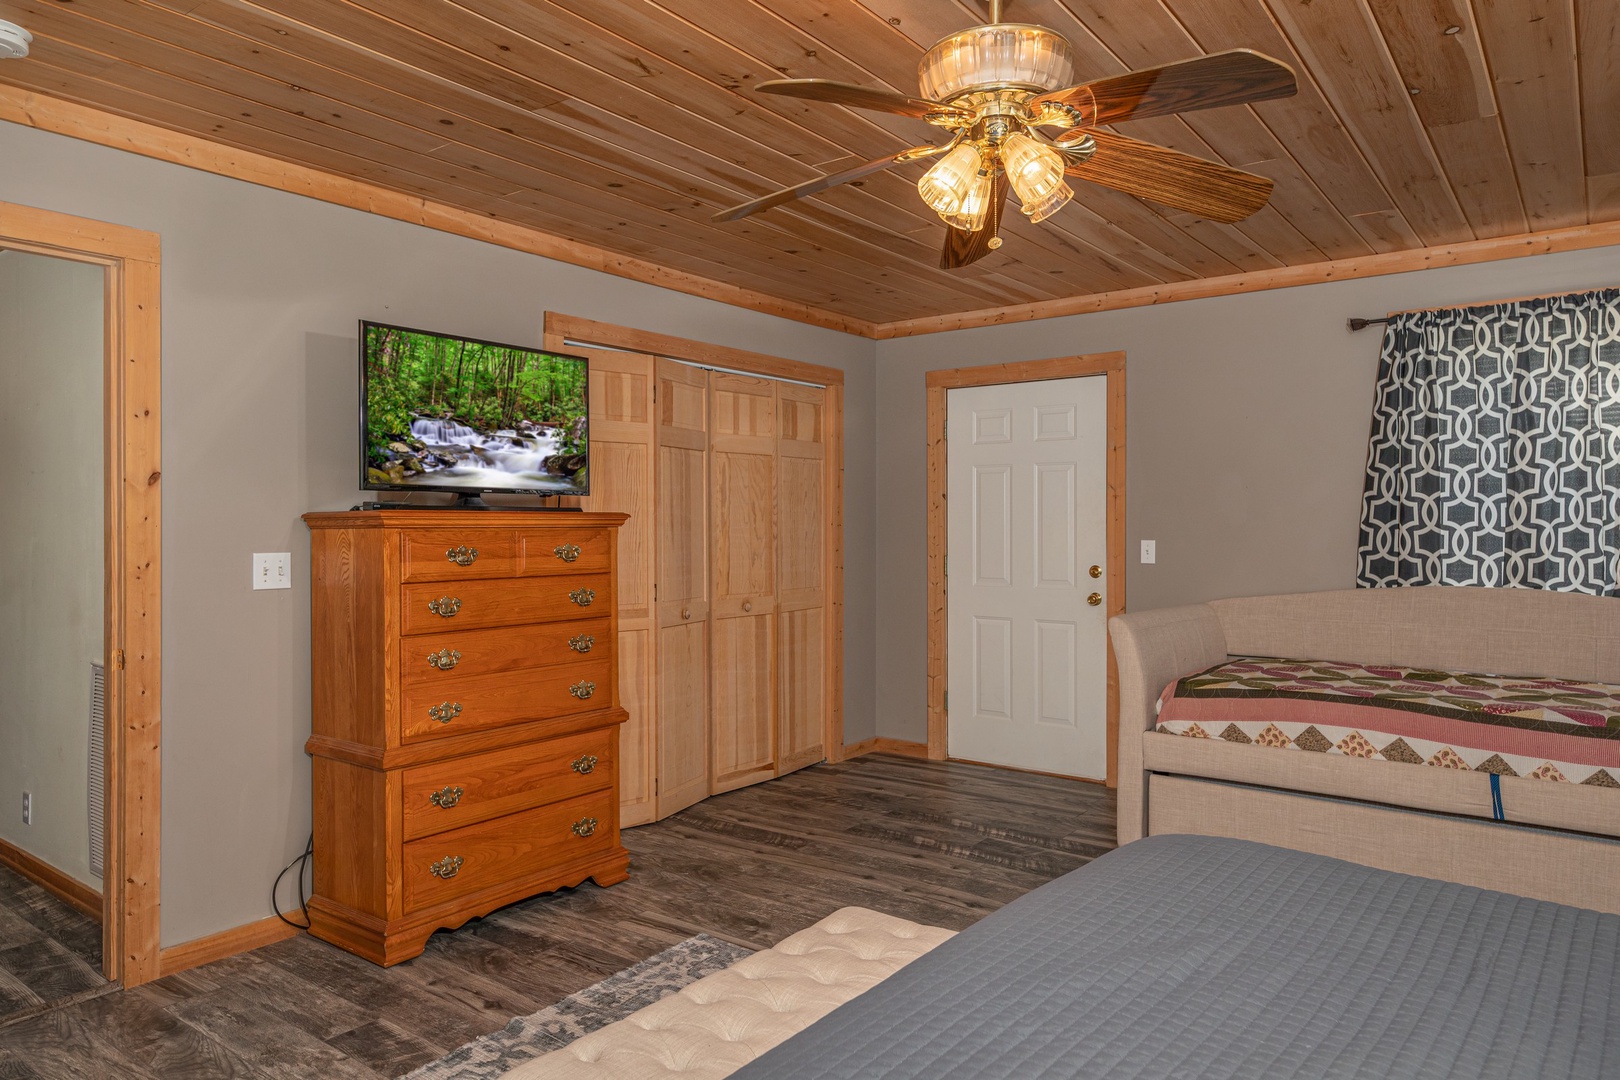 Dresser and TV in a bedroom at Bearadise 4 Us, a 3 bedroom cabin rental located in Pigeon Forge